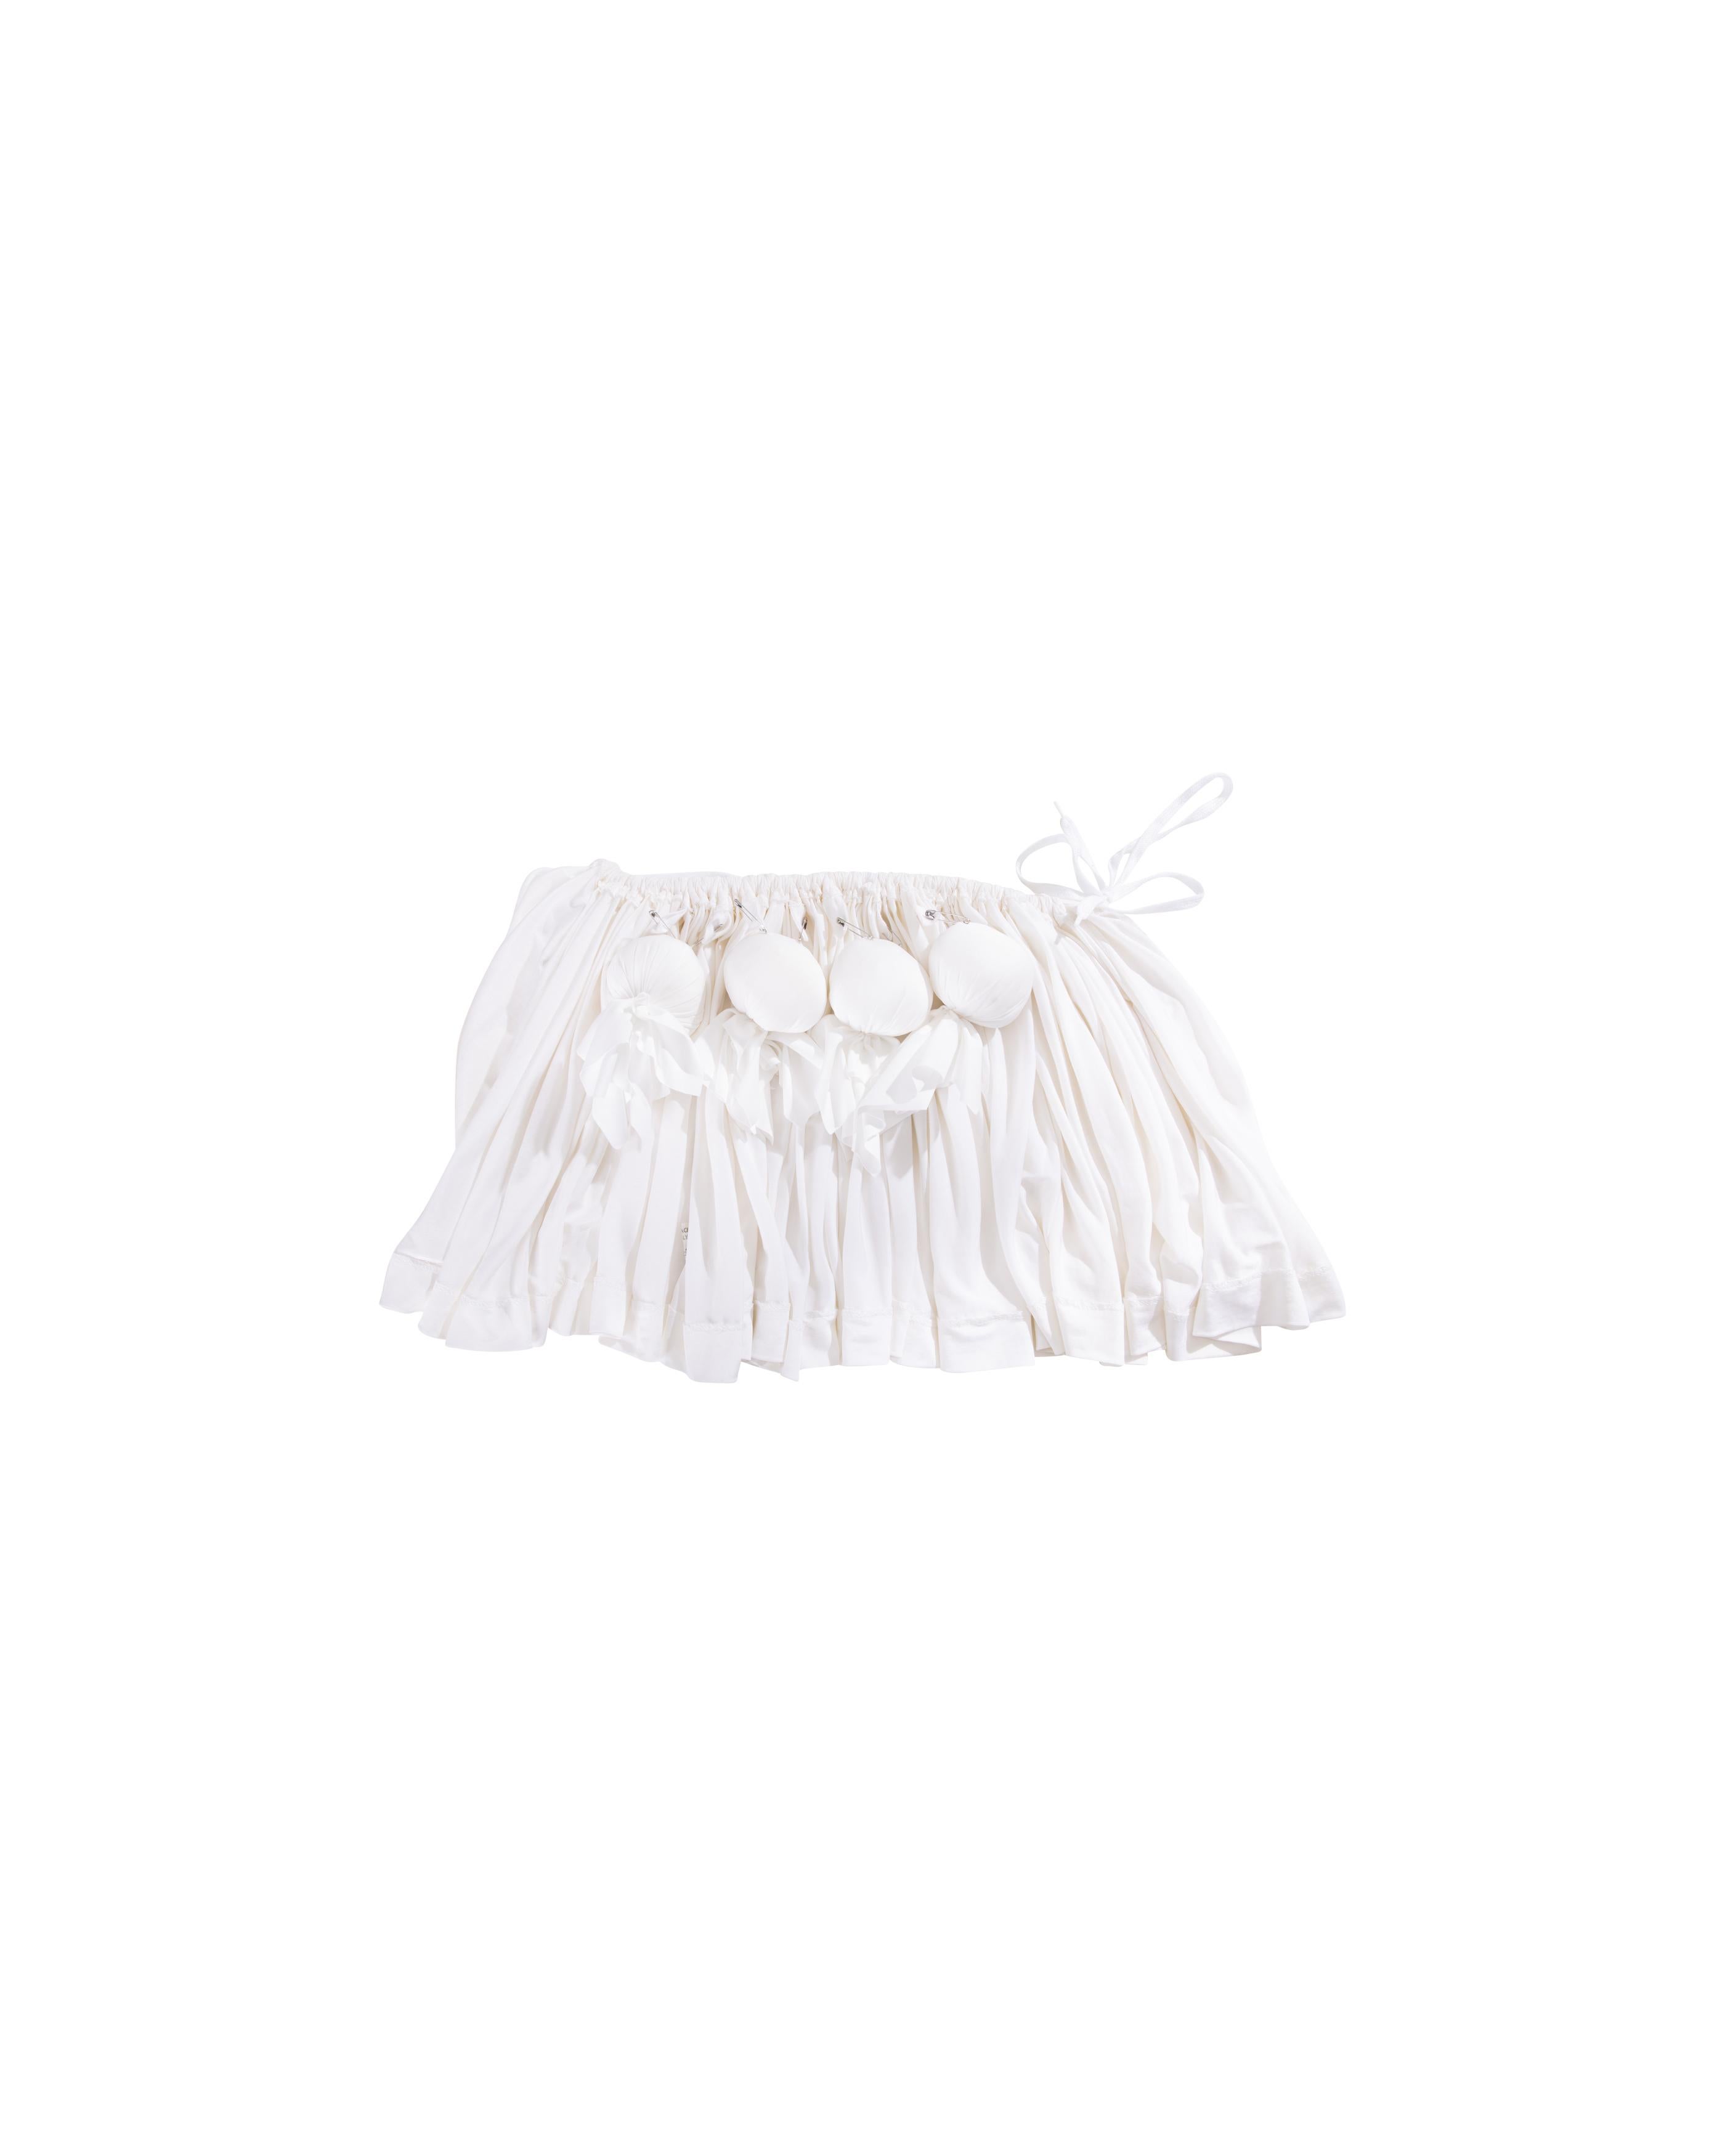 S/S 1988 Vivienne Westwood White Mini Skirt with Removable Bustle 5